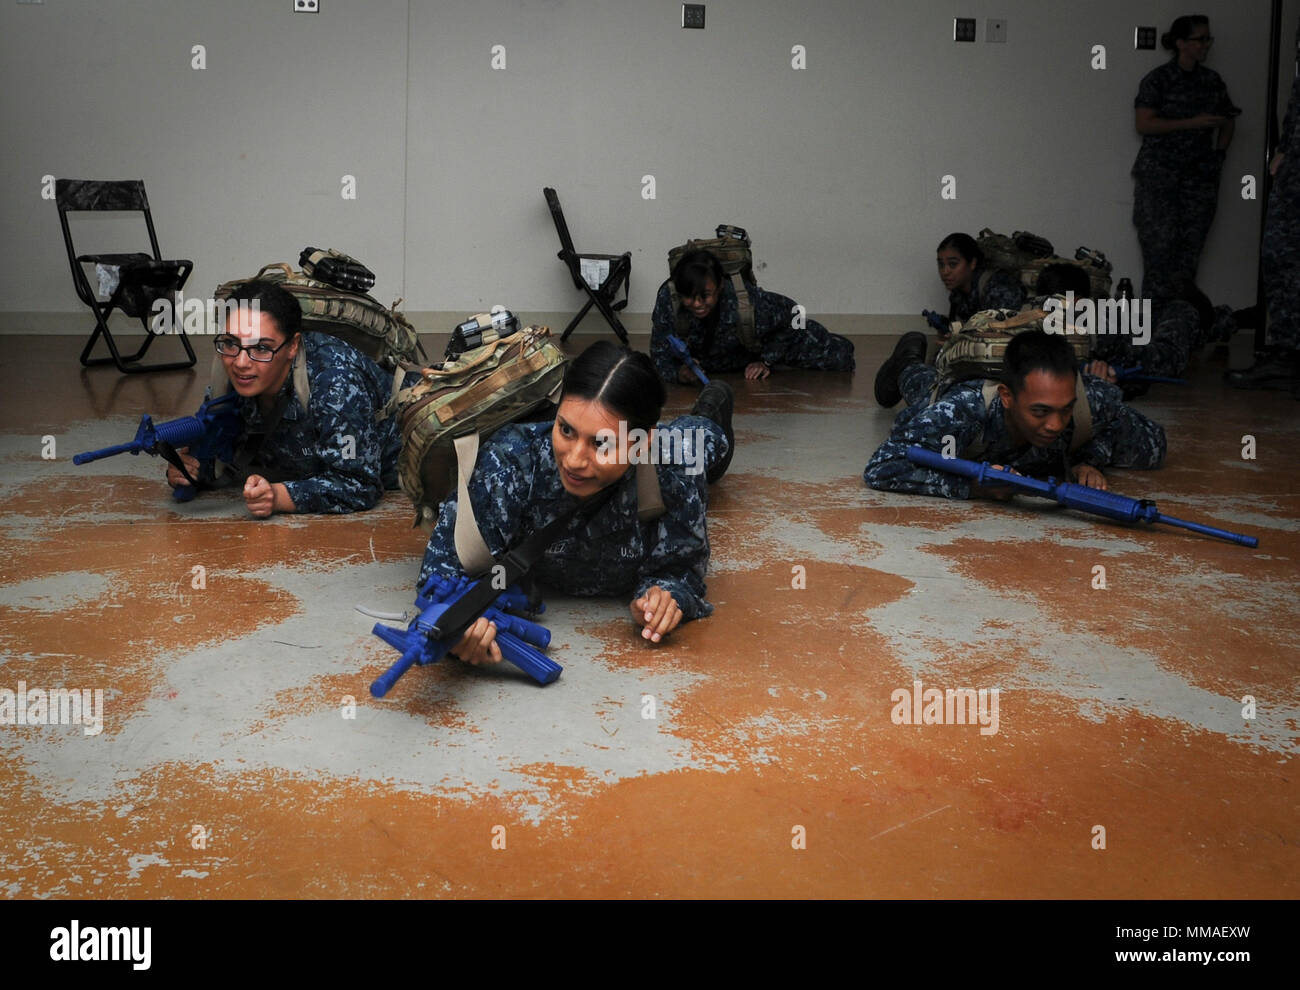 SAN ANTONIO (Oct. 5, 2017) Hospital corpsman (HM) "A" School students crawl  into a simulated combat environment during a final exercise at the Medical  Education and Training Campus on board Joint Base